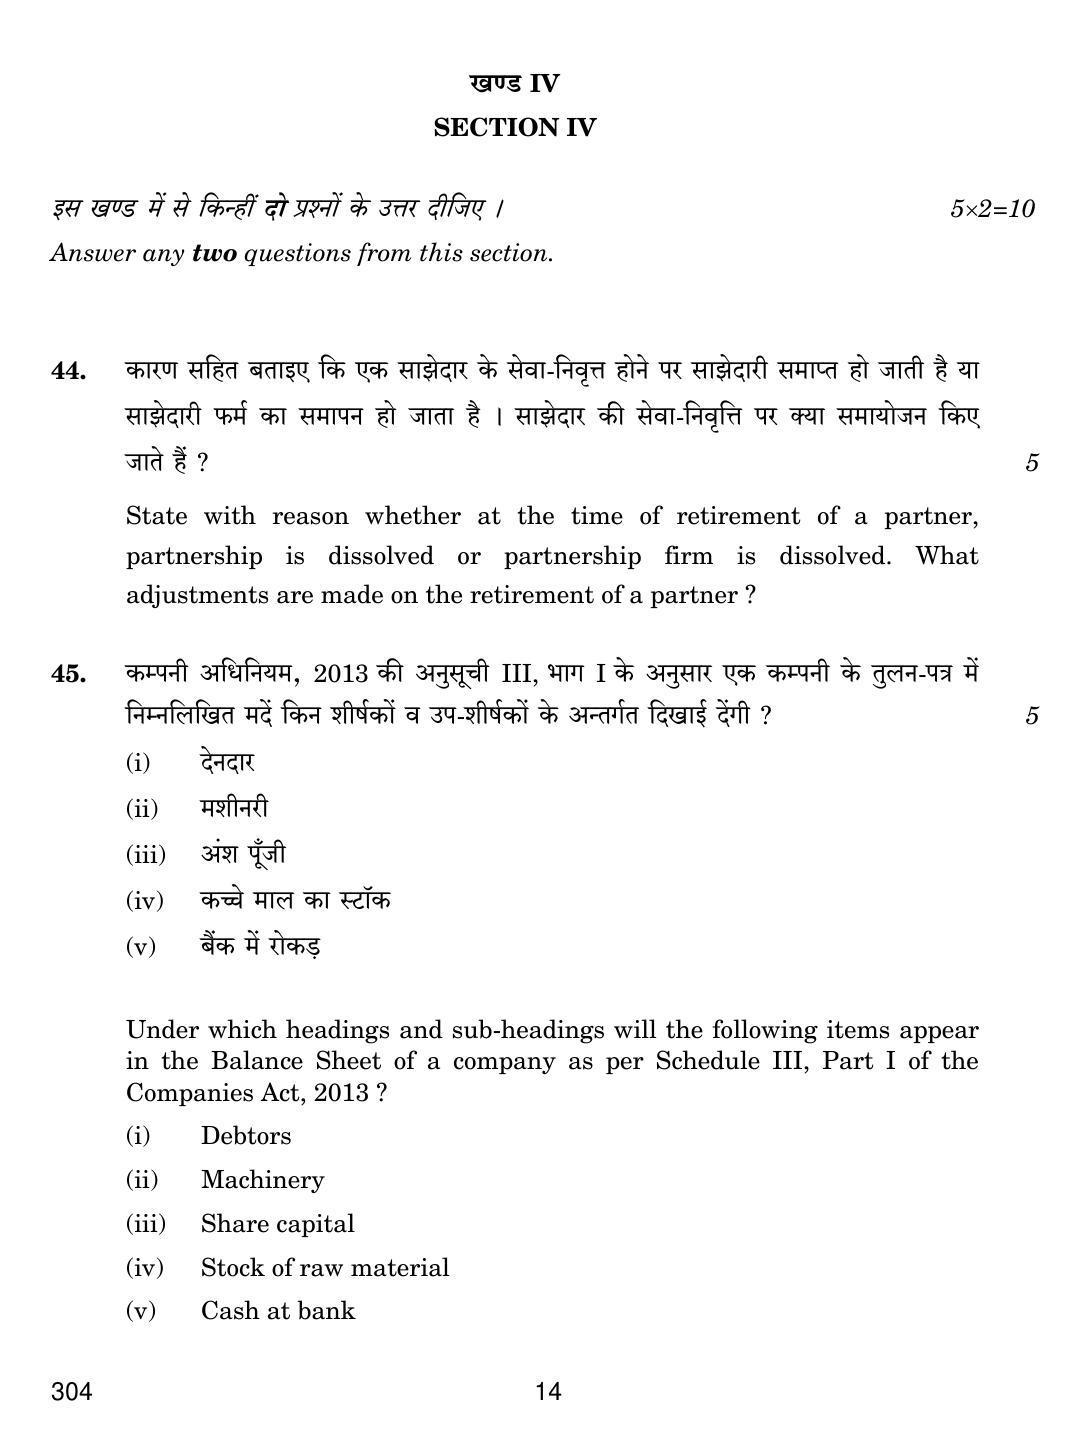 CBSE Class 12 304 FINANCIAL ACCOUNTING 2018 Question Paper - Page 14